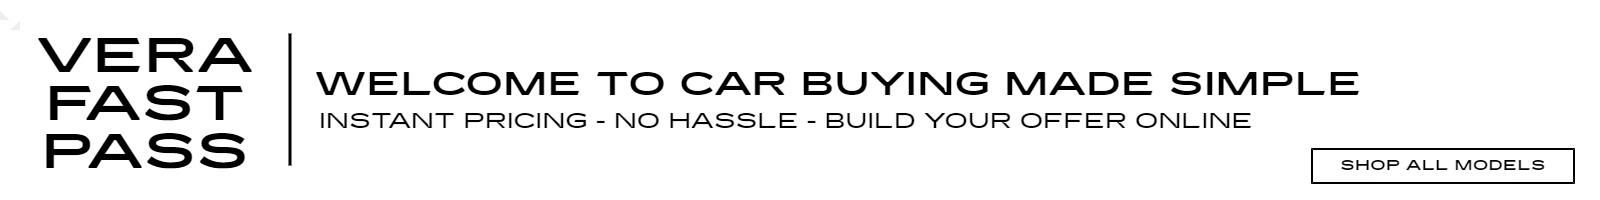 WELCOME TO CAR BUYING MADE SIMPLE